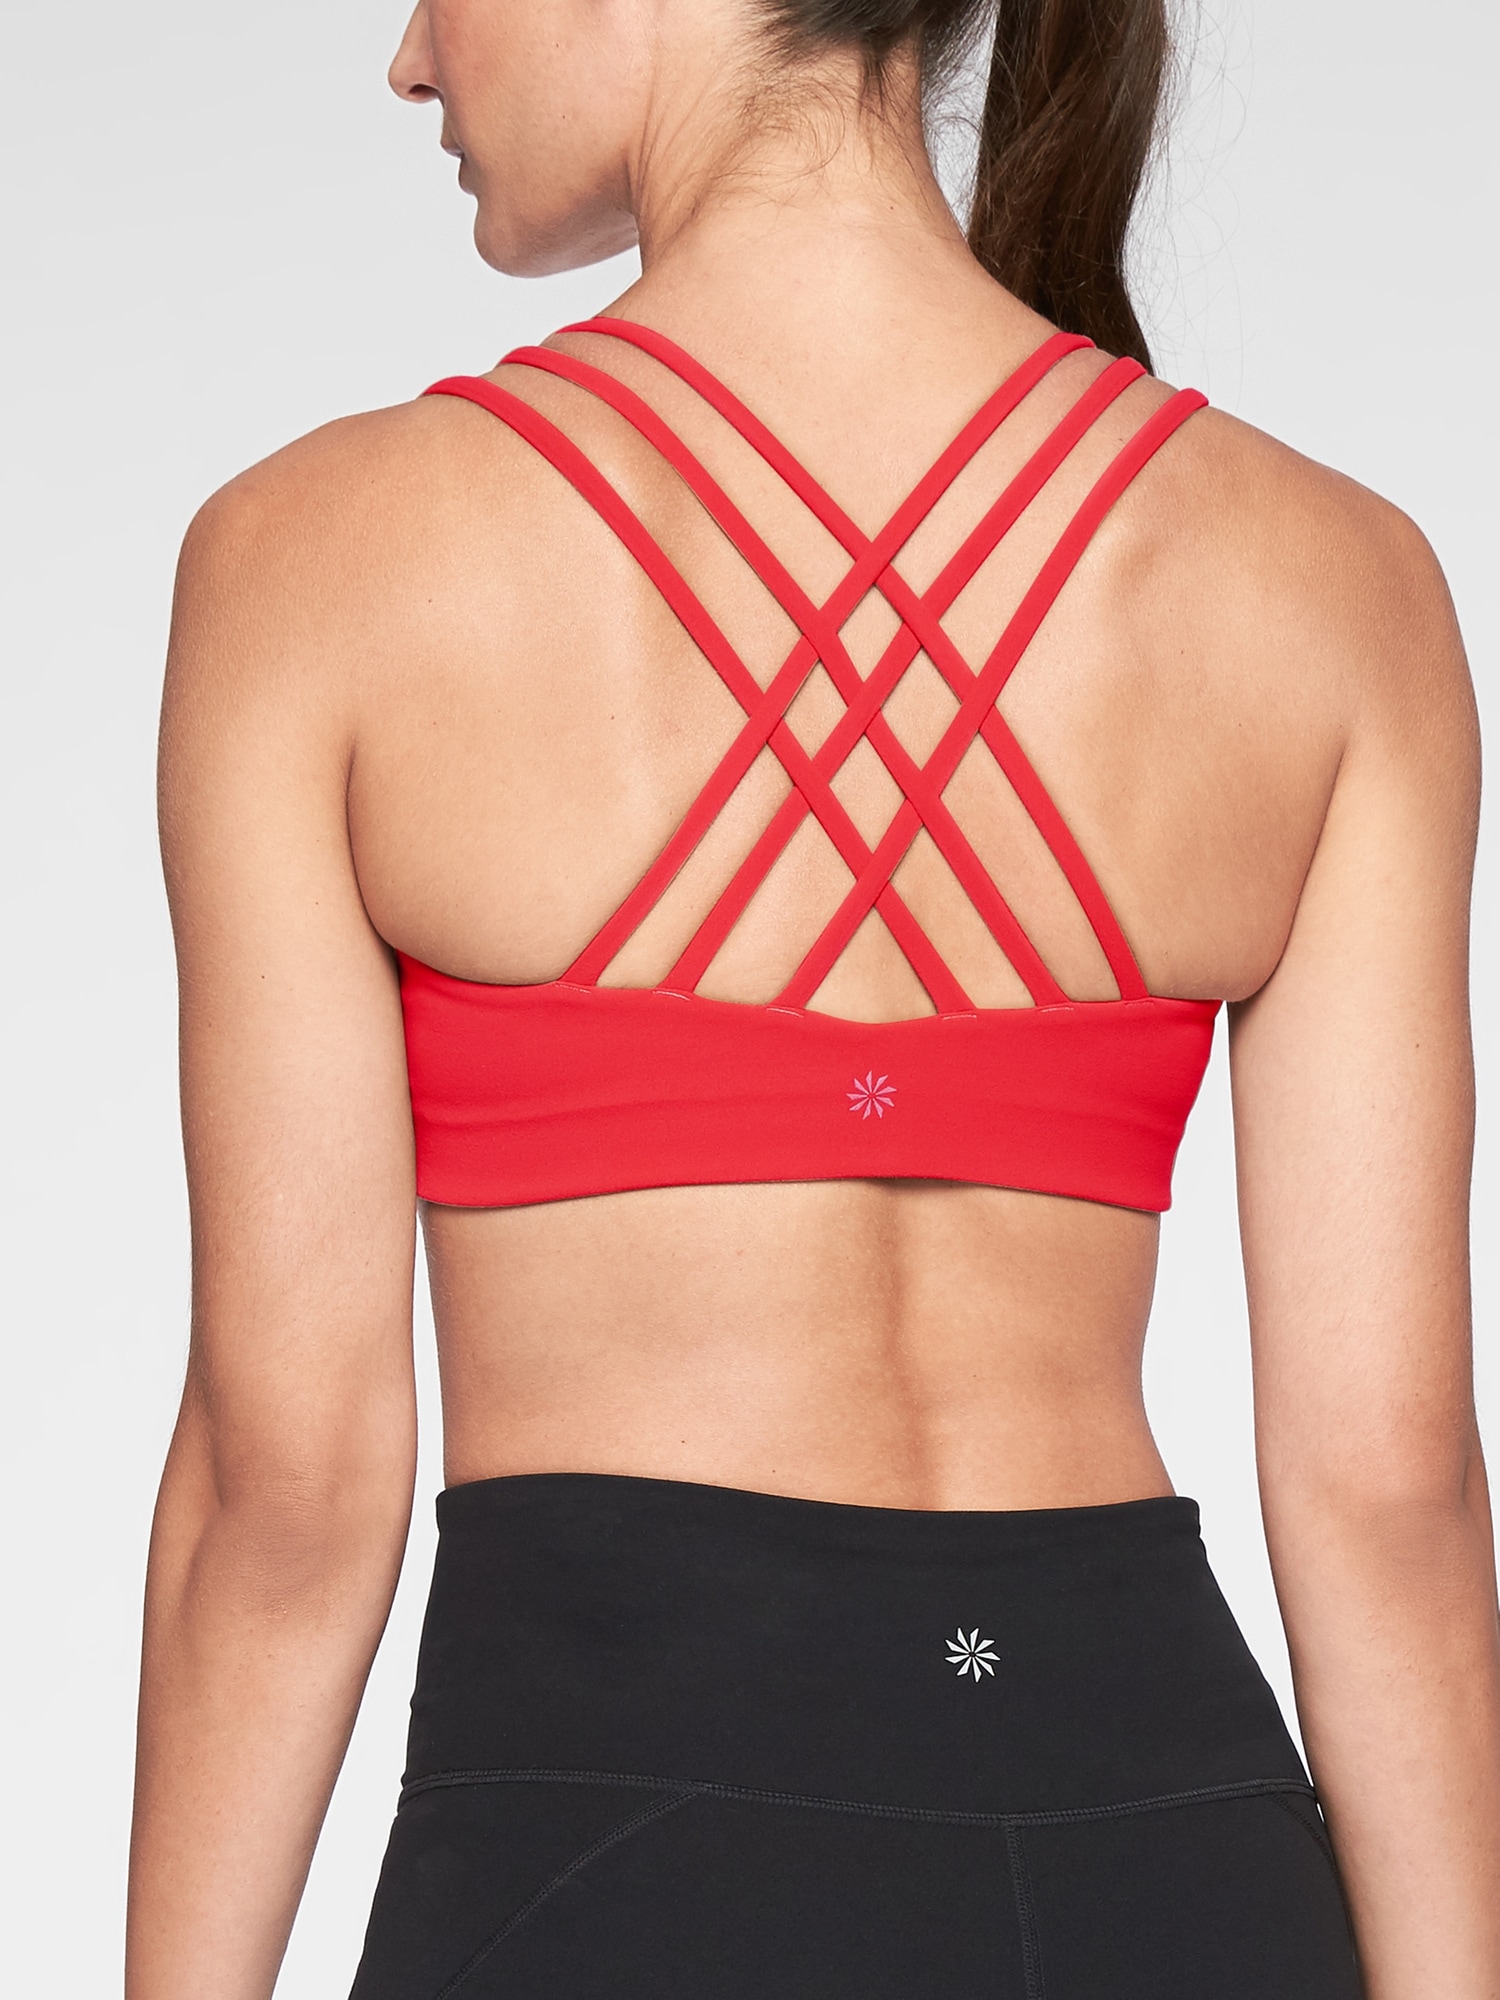 Athleta Intention Crop Top XS A-C Sports Bra Lychee Red Cutout Adjustable  Straps